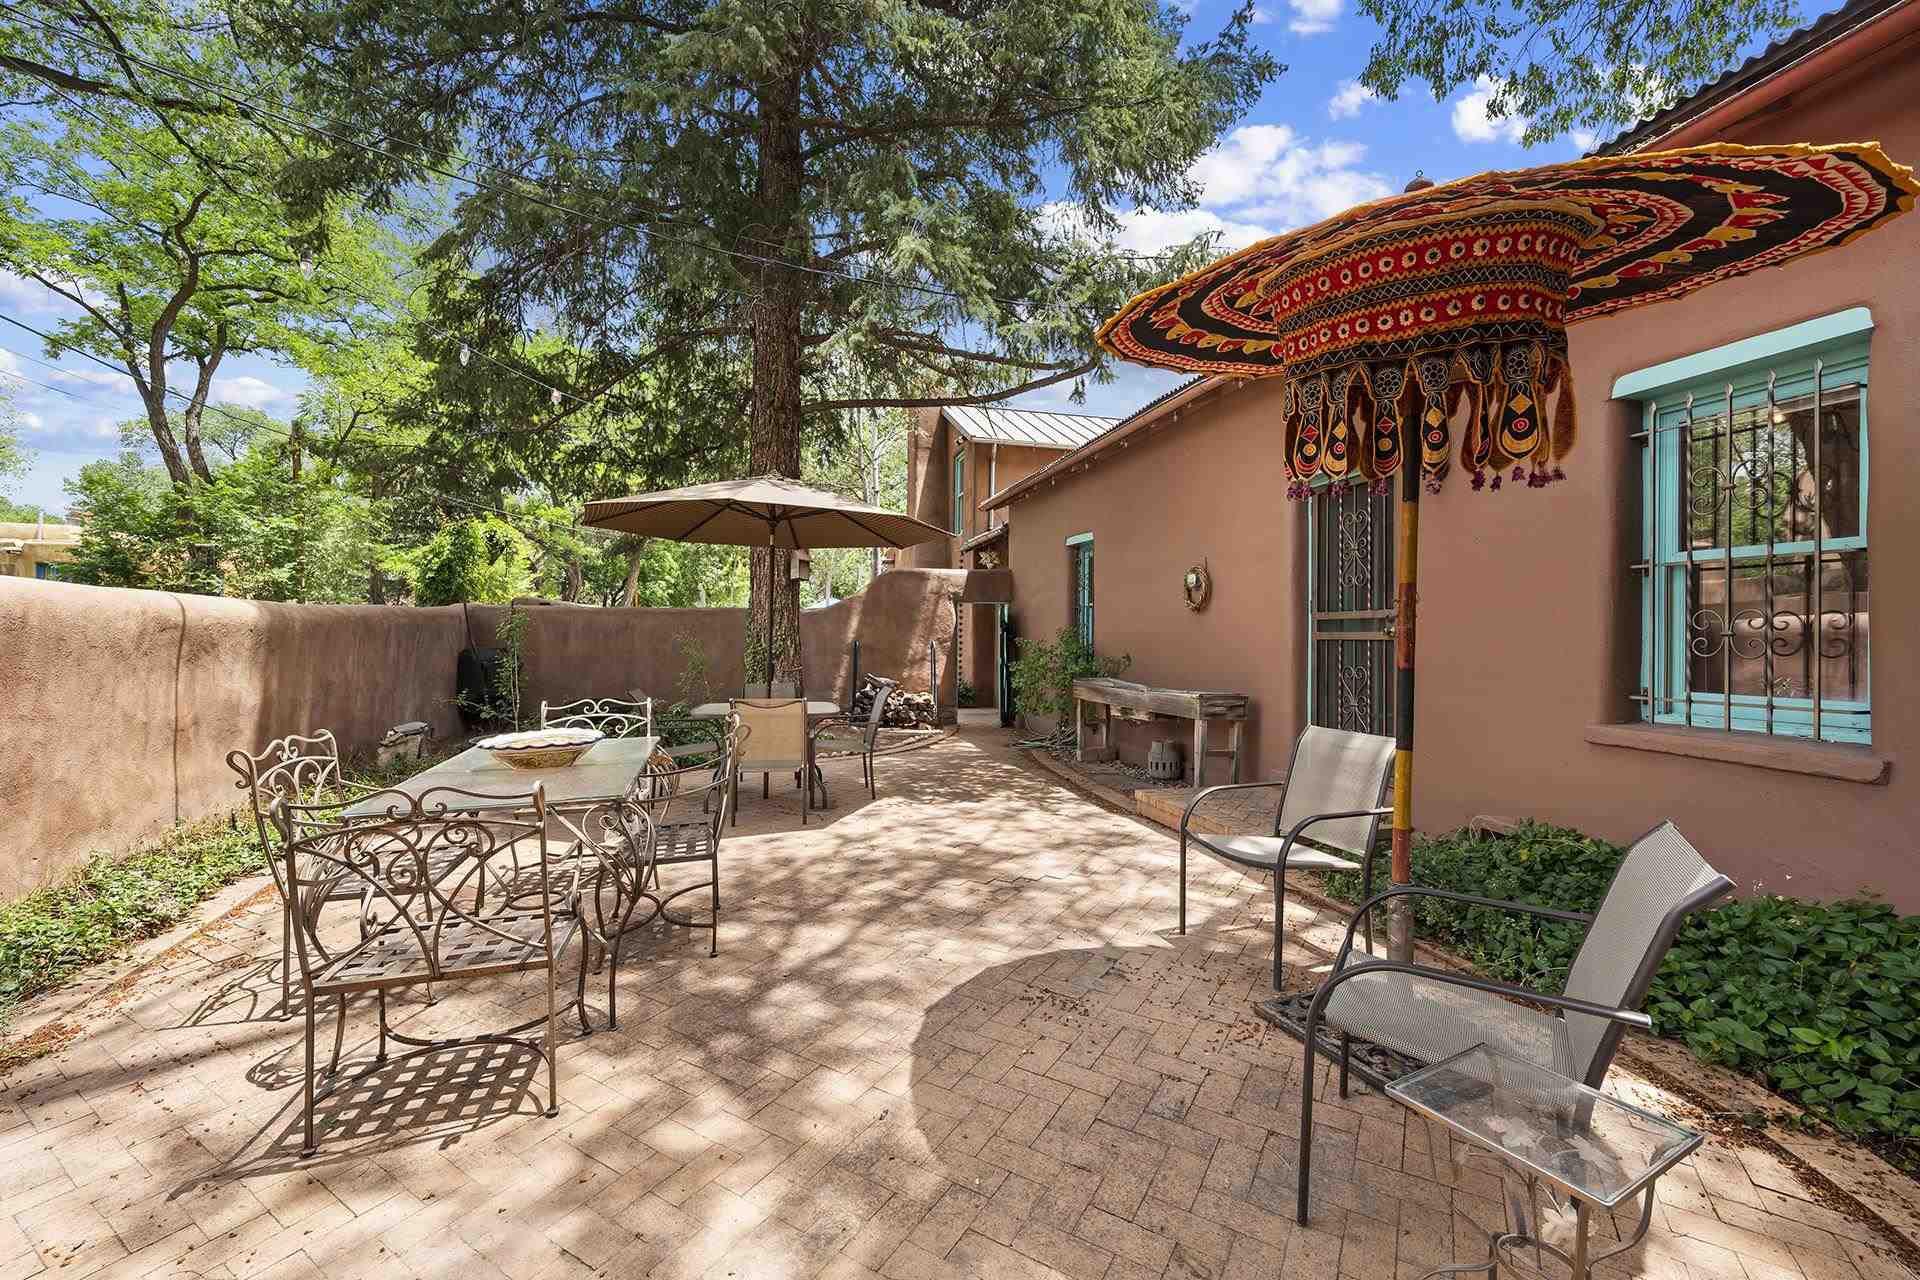 952 Acequia Madre, Santa Fe, New Mexico 87505, 3 Bedrooms Bedrooms, ,4 BathroomsBathrooms,Residential,For Sale,952 Acequia Madre,202102956